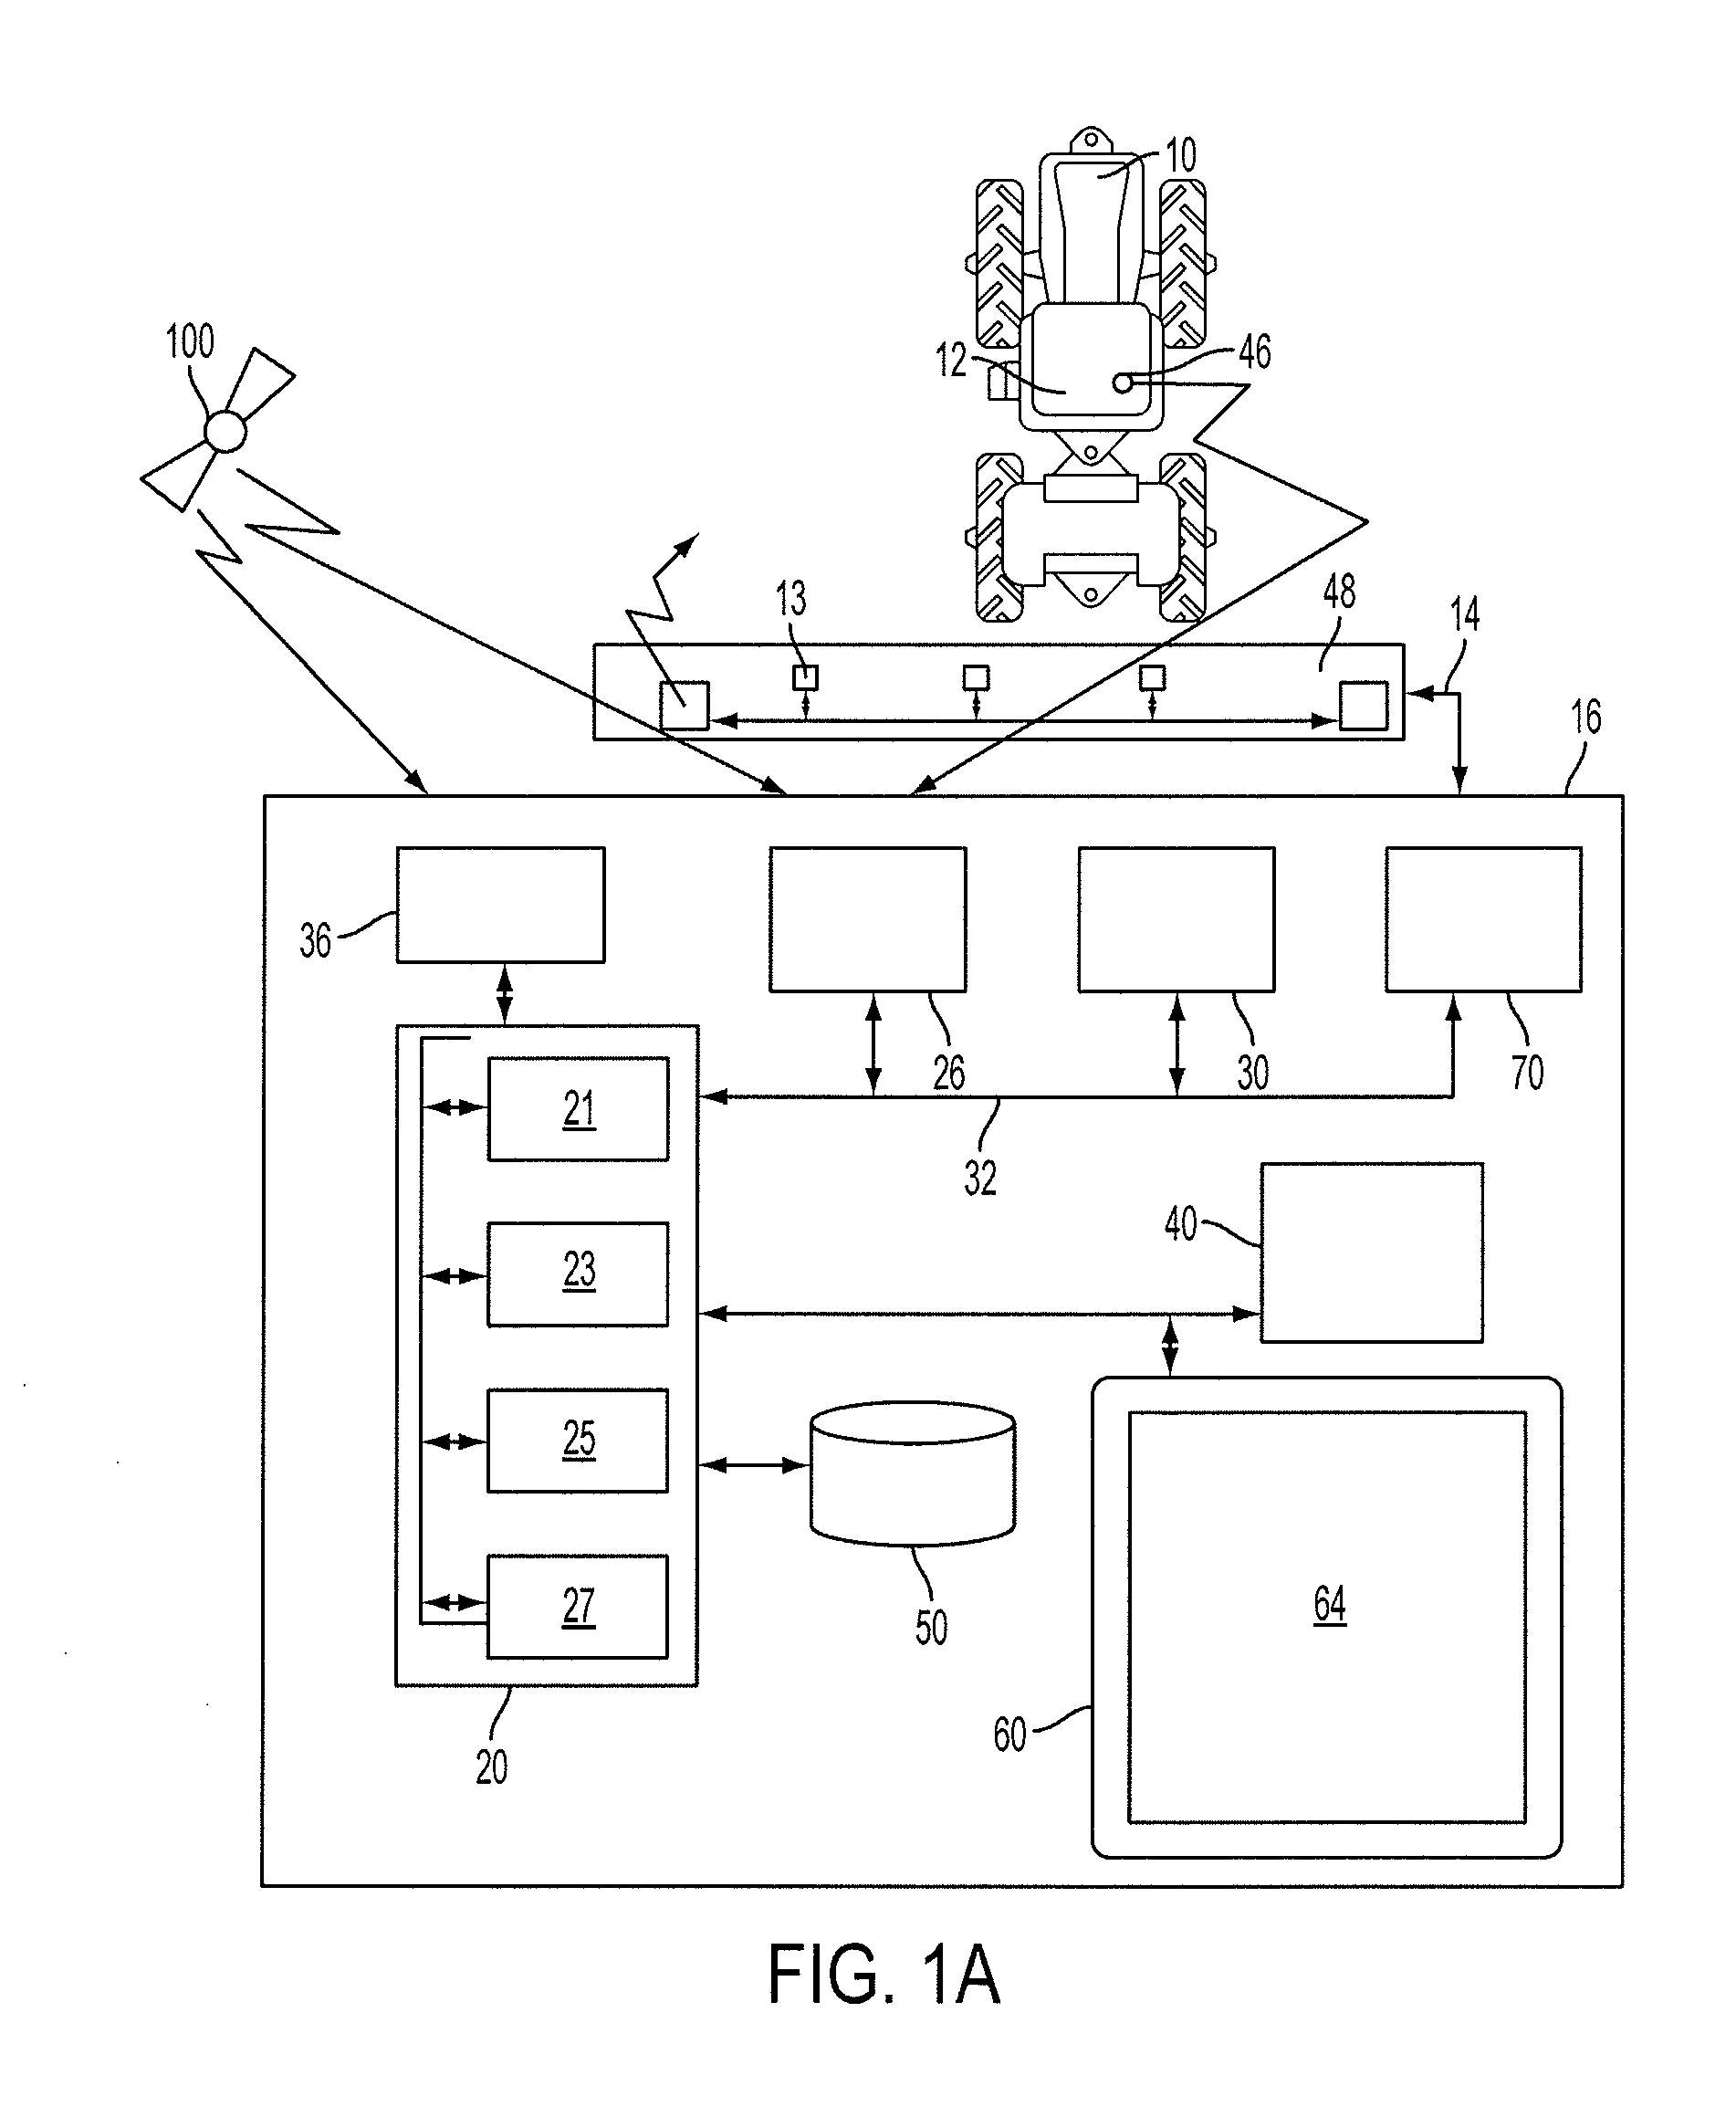 Monitoring and control display system and method